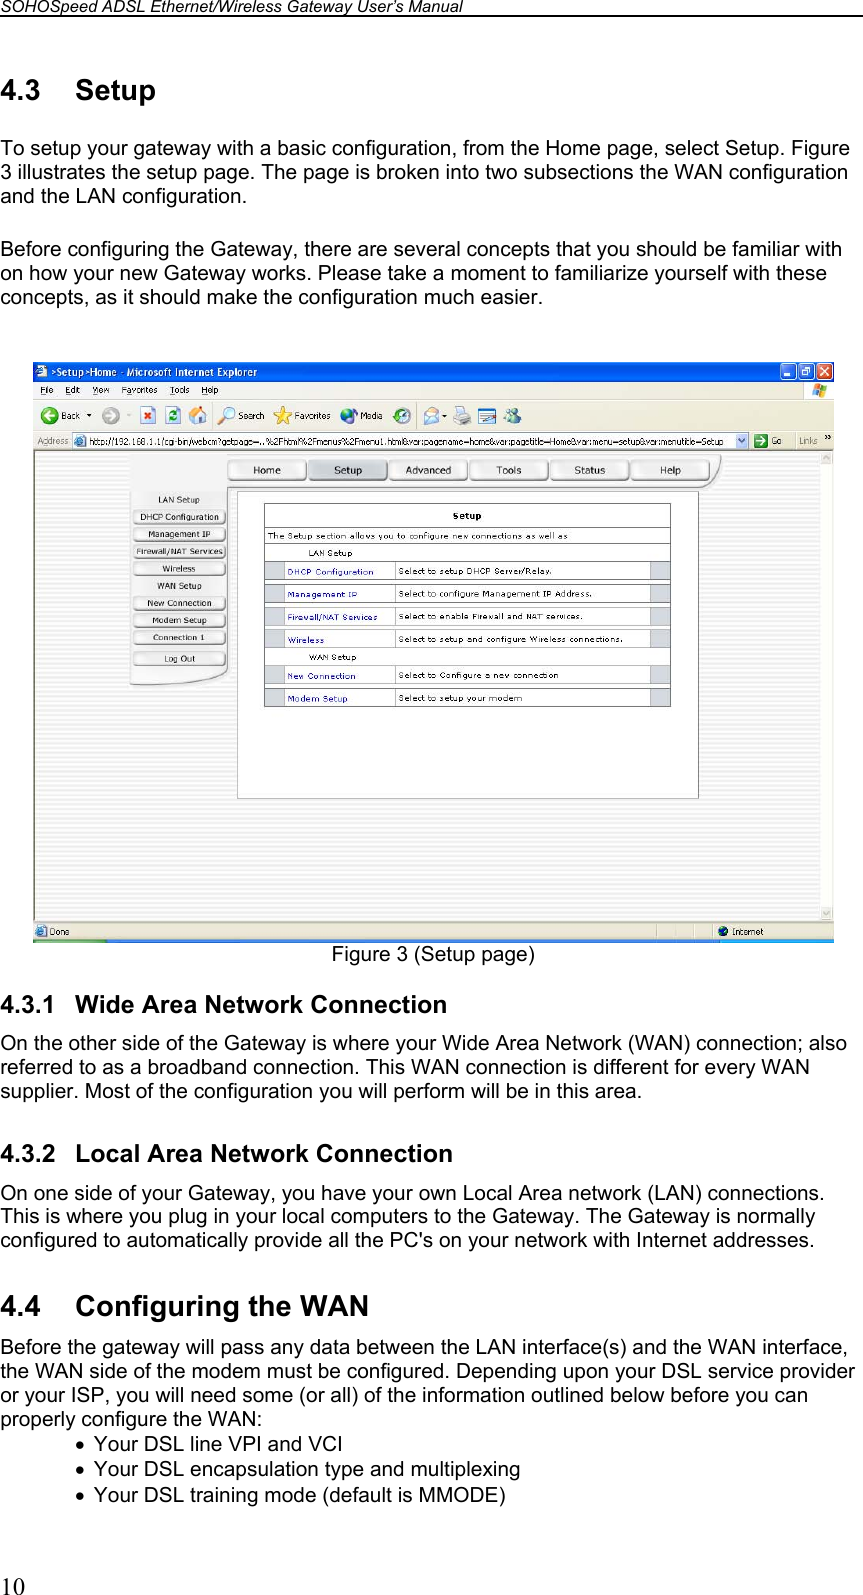 SOHOSpeed ADSL Ethernet/Wireless Gateway User’s Manual    10 4.3 Setup To setup your gateway with a basic configuration, from the Home page, select Setup. Figure 3 illustrates the setup page. The page is broken into two subsections the WAN configuration and the LAN configuration. Before configuring the Gateway, there are several concepts that you should be familiar with on how your new Gateway works. Please take a moment to familiarize yourself with these concepts, as it should make the configuration much easier.   Figure 3 (Setup page)  4.3.1  Wide Area Network Connection On the other side of the Gateway is where your Wide Area Network (WAN) connection; also referred to as a broadband connection. This WAN connection is different for every WAN supplier. Most of the configuration you will perform will be in this area.  4.3.2  Local Area Network Connection On one side of your Gateway, you have your own Local Area network (LAN) connections. This is where you plug in your local computers to the Gateway. The Gateway is normally configured to automatically provide all the PC&apos;s on your network with Internet addresses.  4.4  Configuring the WAN Before the gateway will pass any data between the LAN interface(s) and the WAN interface, the WAN side of the modem must be configured. Depending upon your DSL service provider or your ISP, you will need some (or all) of the information outlined below before you can properly configure the WAN: •  Your DSL line VPI and VCI •  Your DSL encapsulation type and multiplexing •  Your DSL training mode (default is MMODE) 